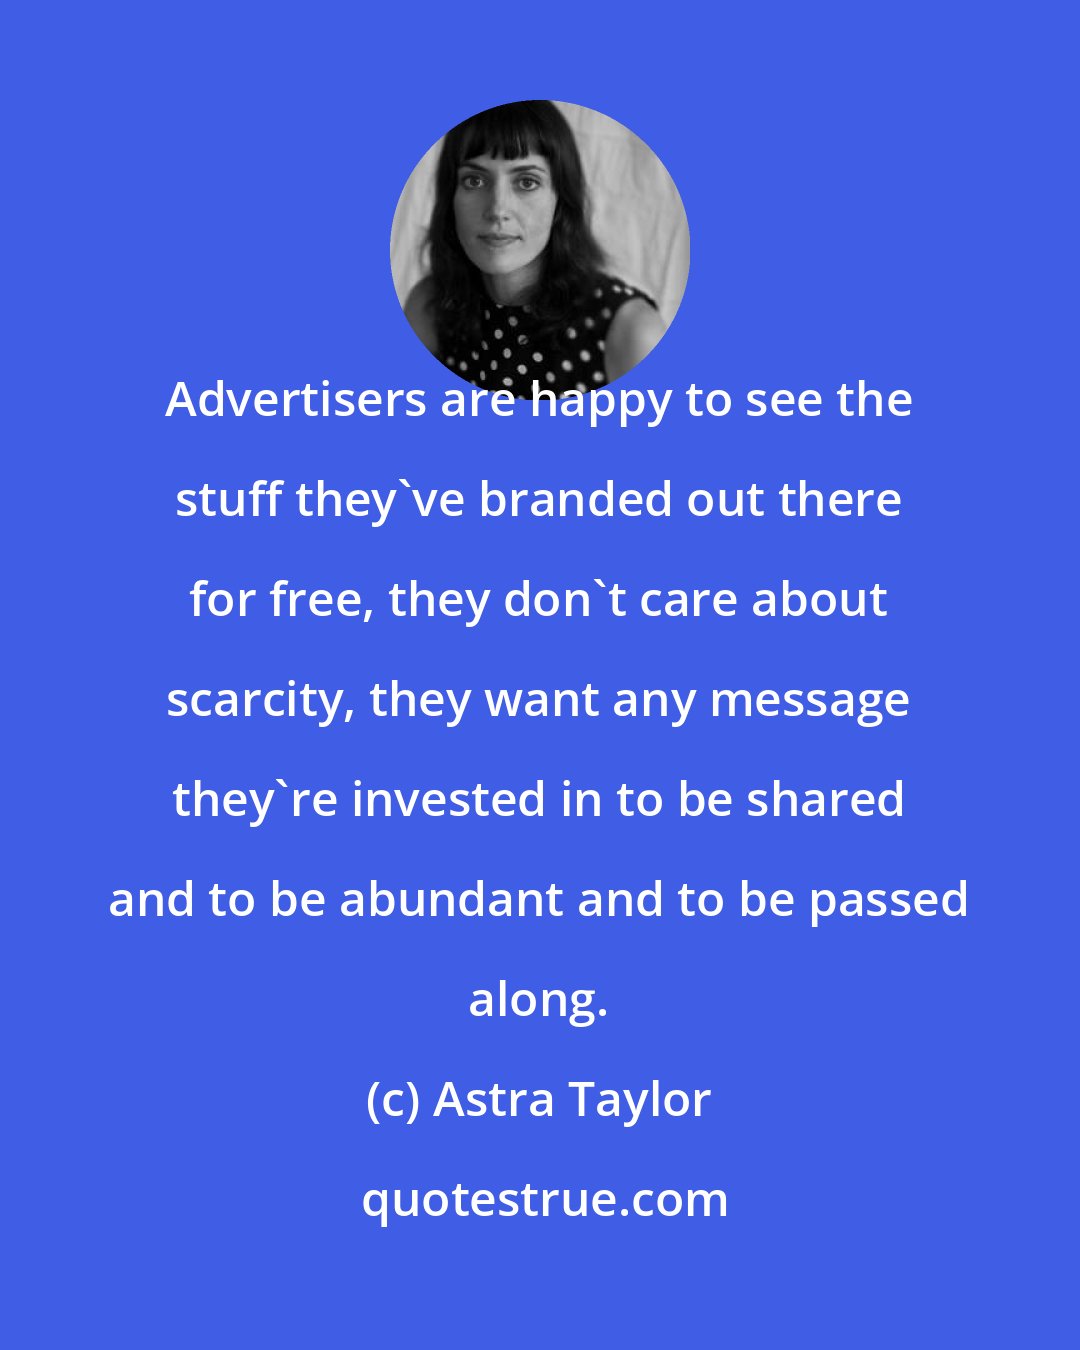 Astra Taylor: Advertisers are happy to see the stuff they've branded out there for free, they don't care about scarcity, they want any message they're invested in to be shared and to be abundant and to be passed along.